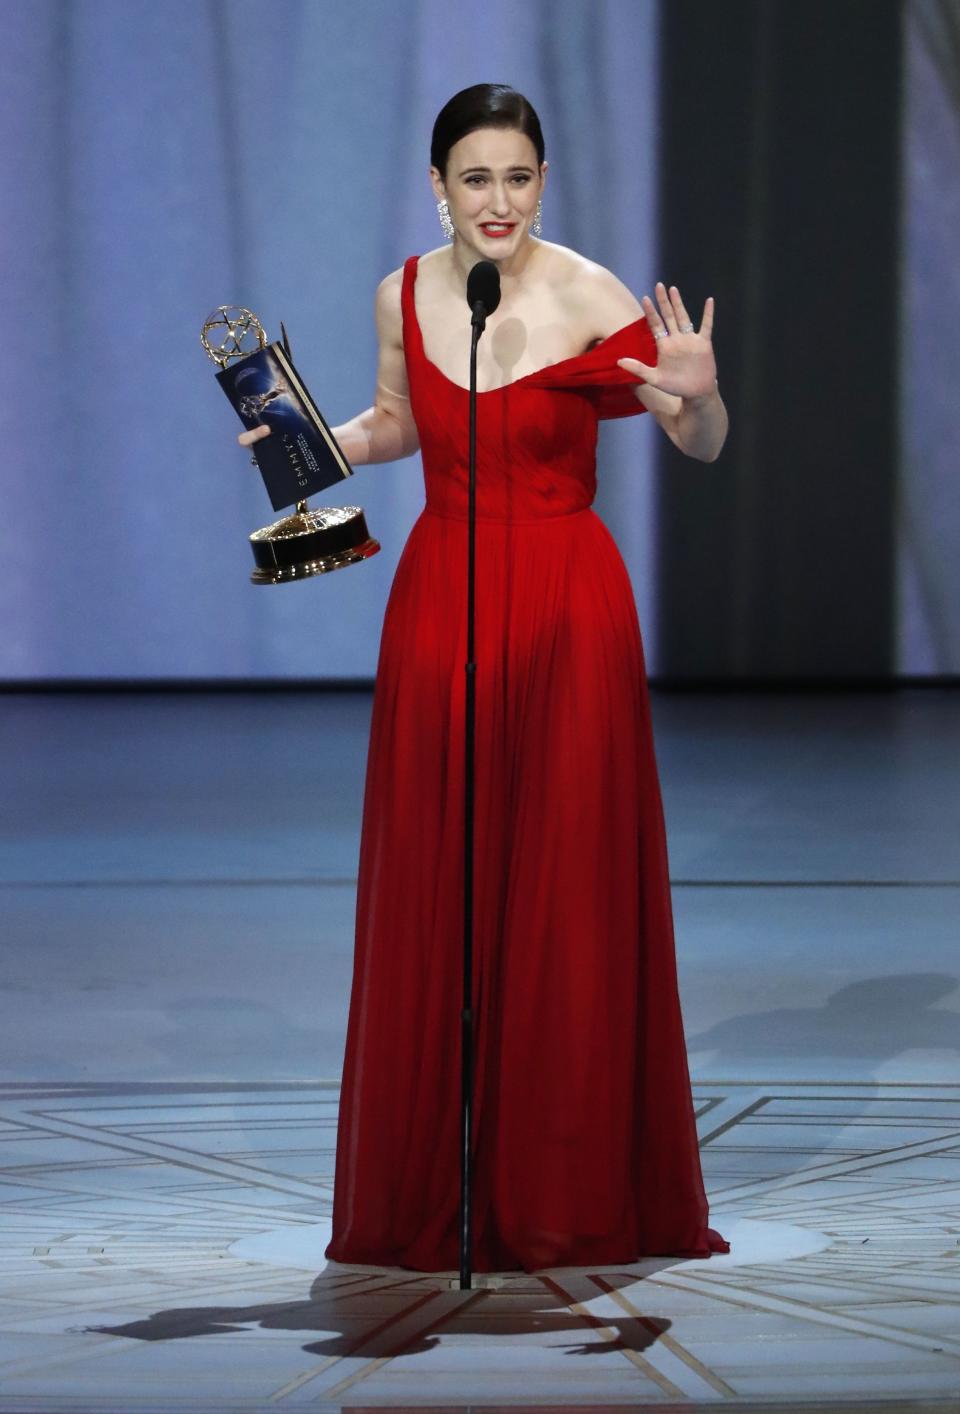 Rachel Brosnahan for <I>The Marvelous Mrs. Maisel</I> wins the Emmy for Outstanding Lead Actress in a Comedy series. REUTERS/Mario Anzuoni